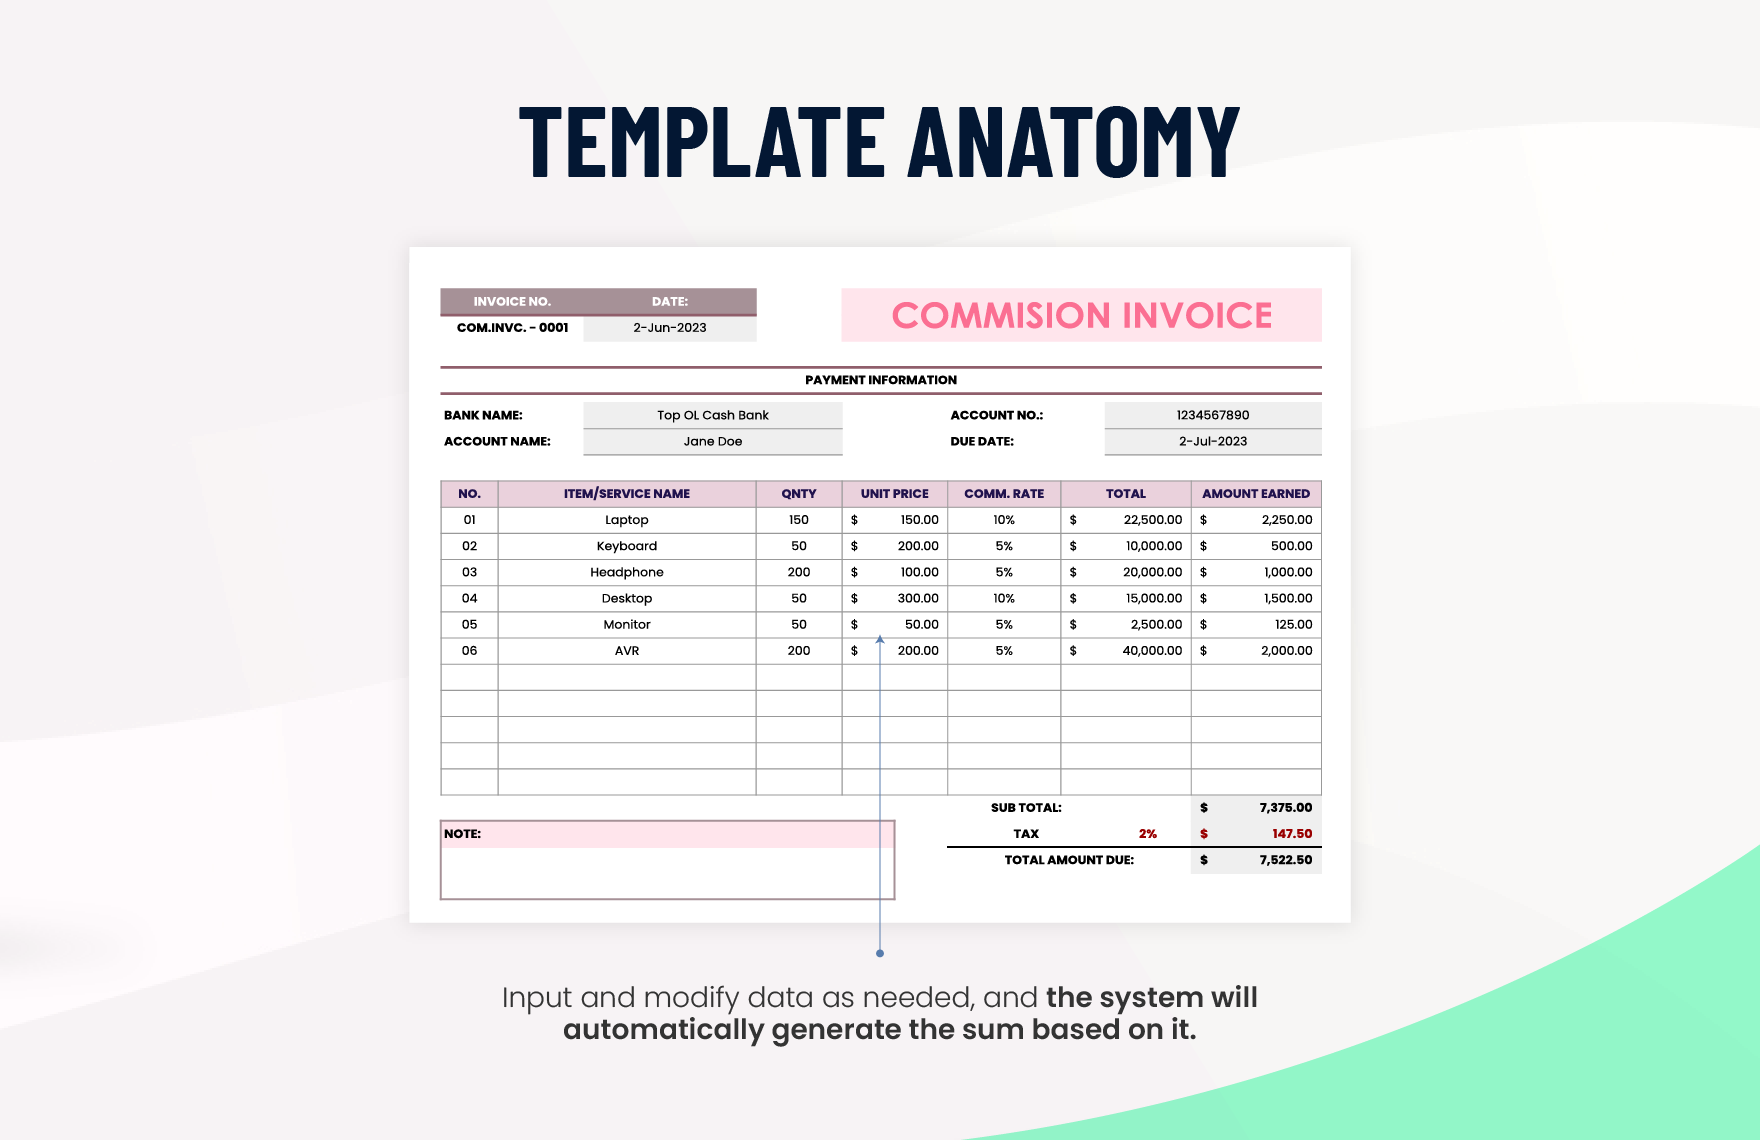 Commission Invoice Template